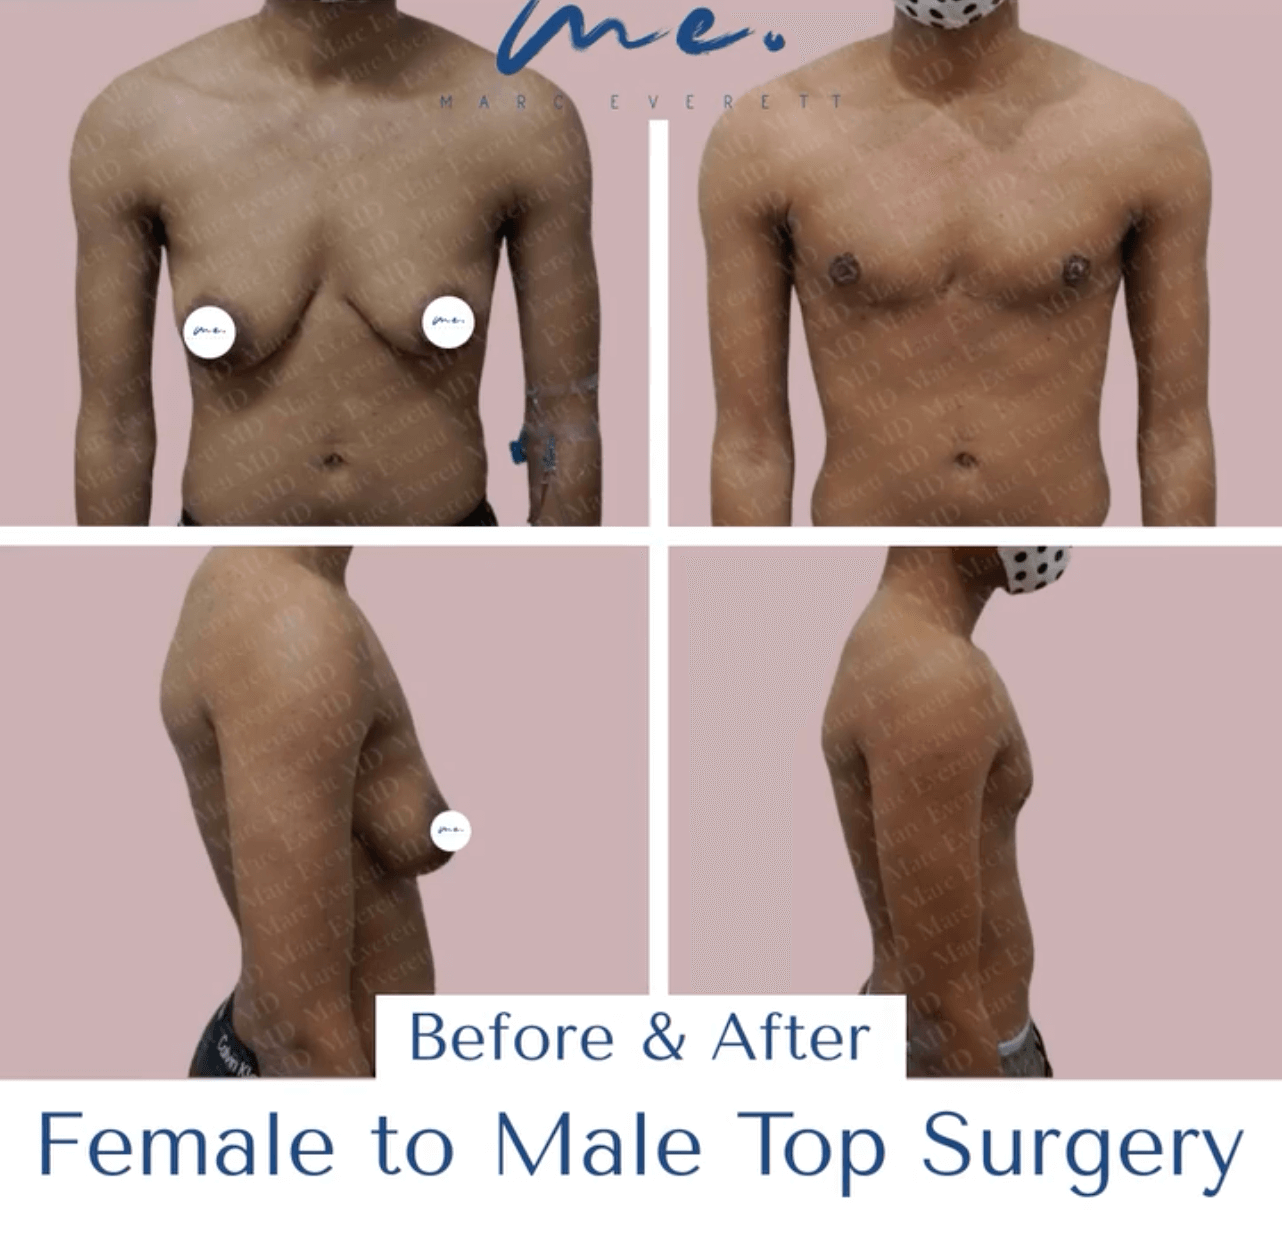 How to Get Top Surgery: Techniques, Costs, What to Expect, and